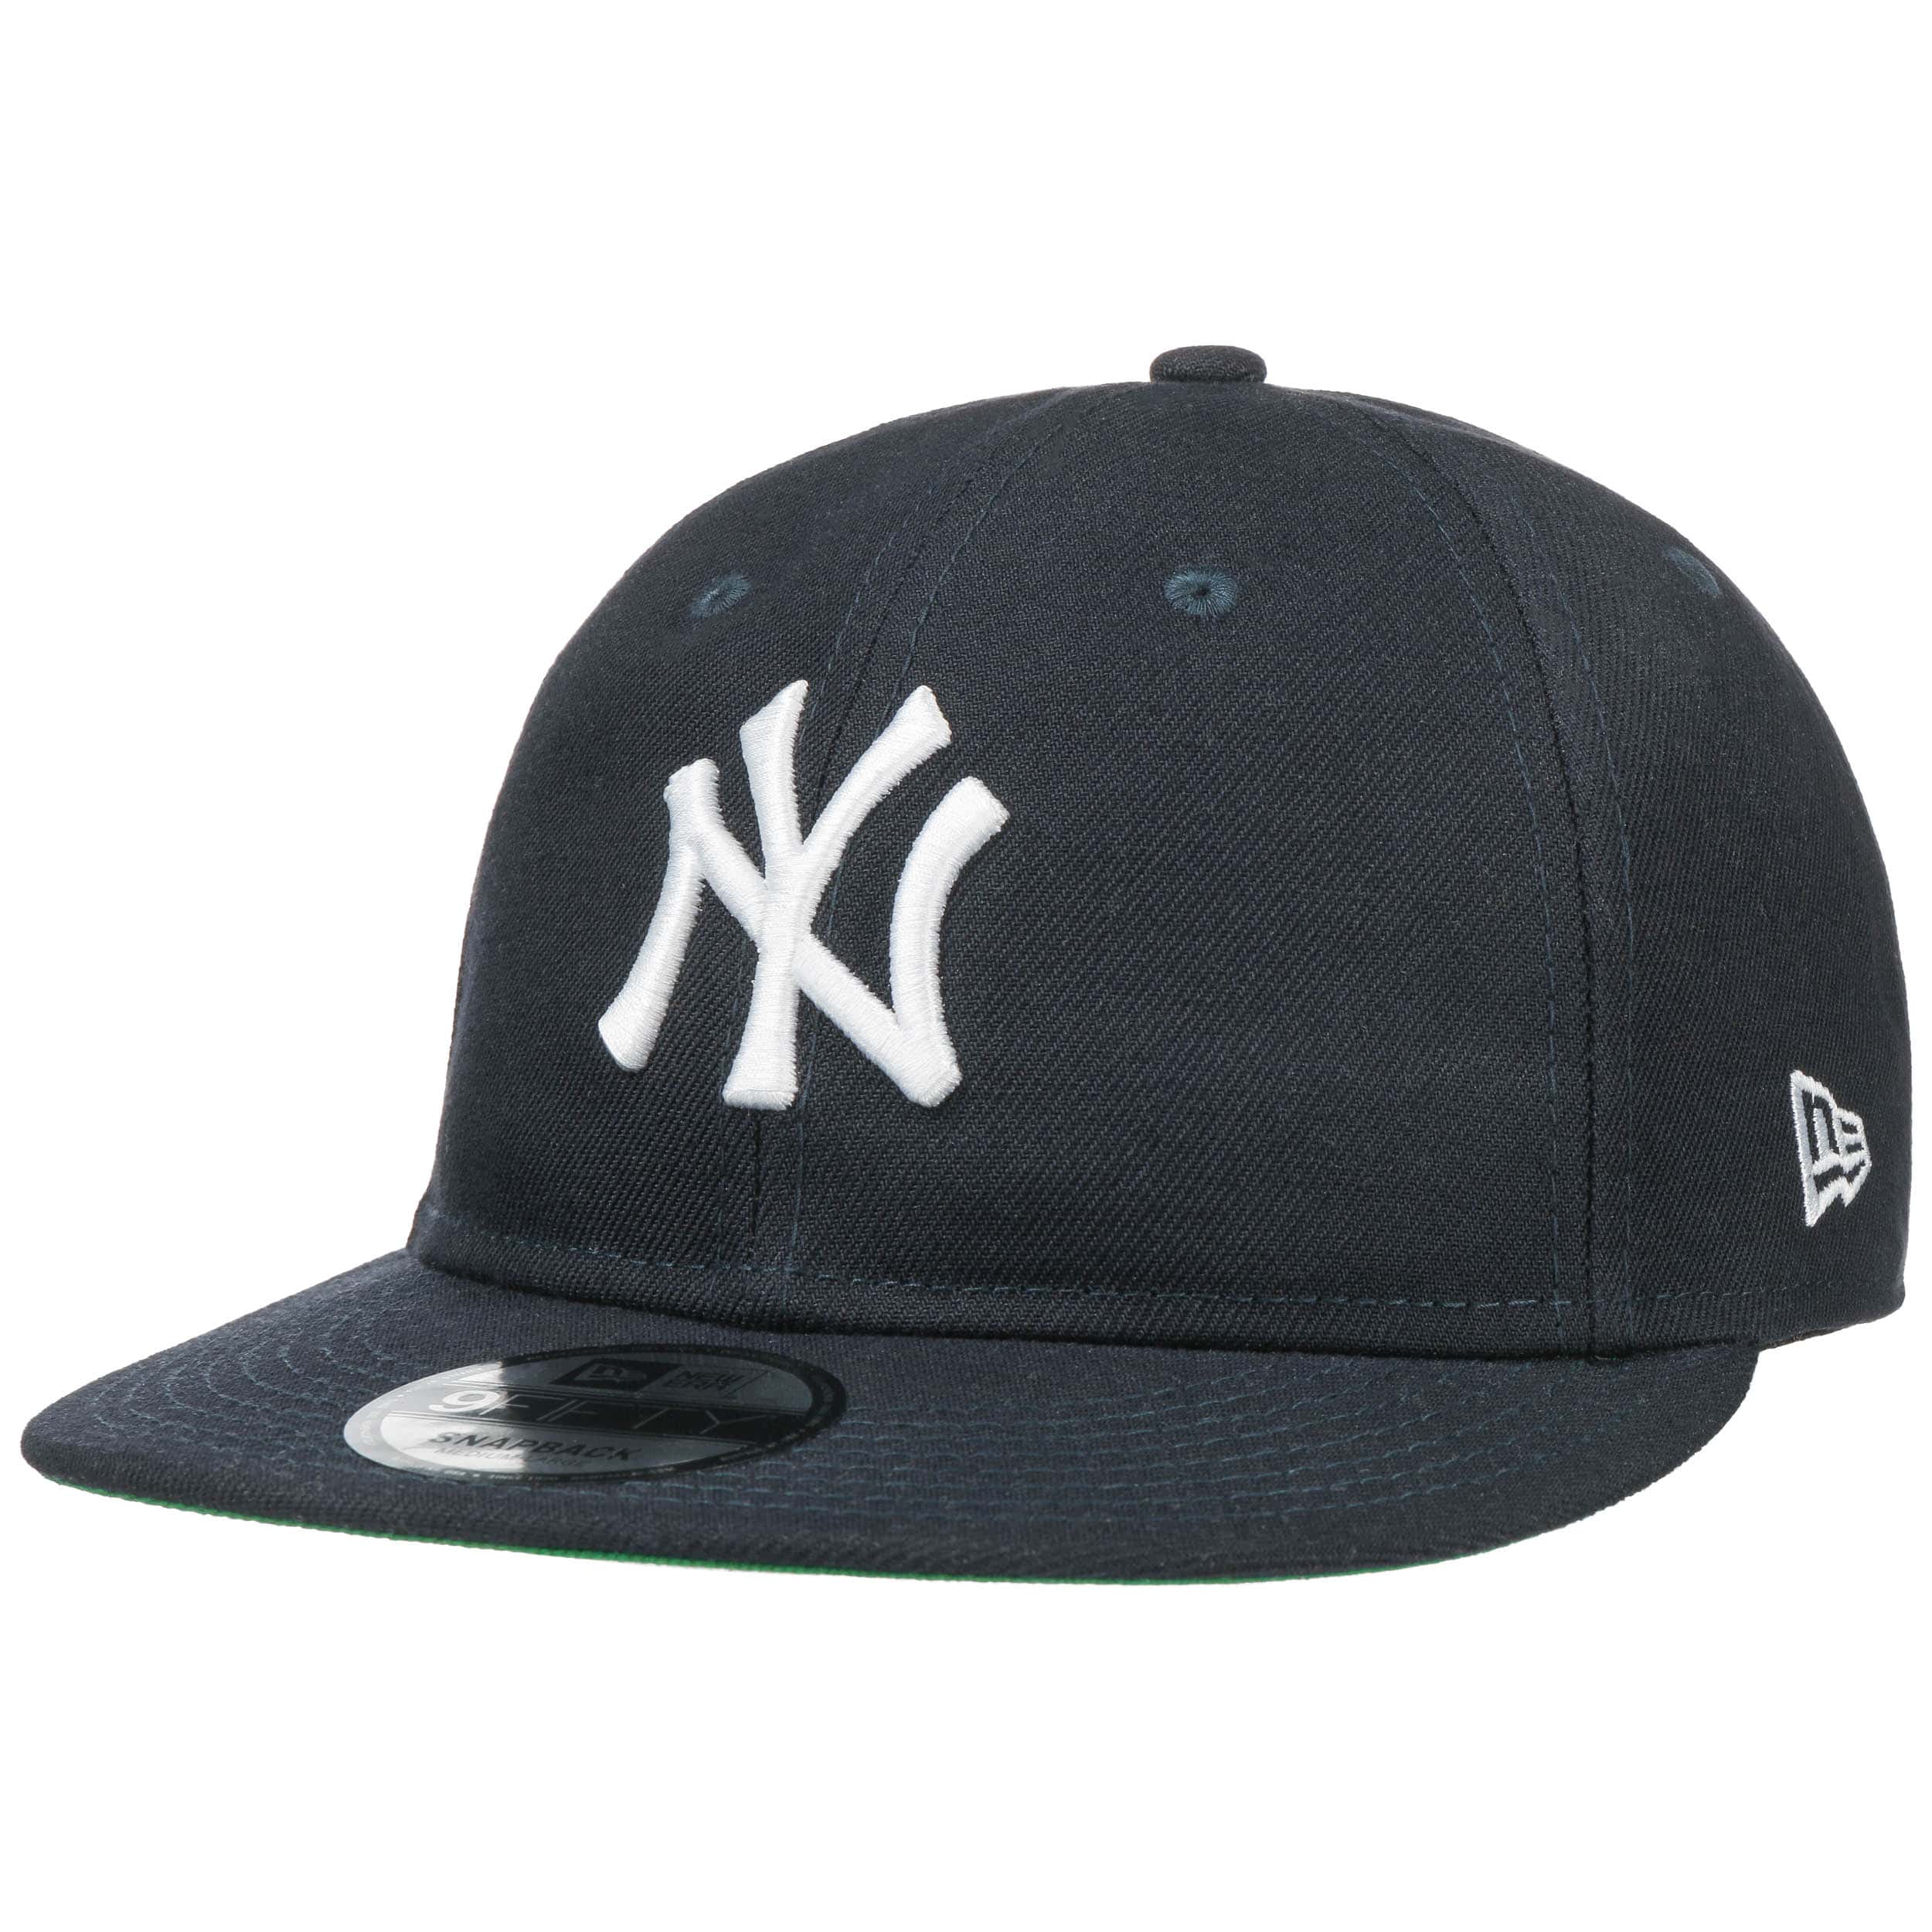 9Fifty Retro Crown Yankees Cap by New Era